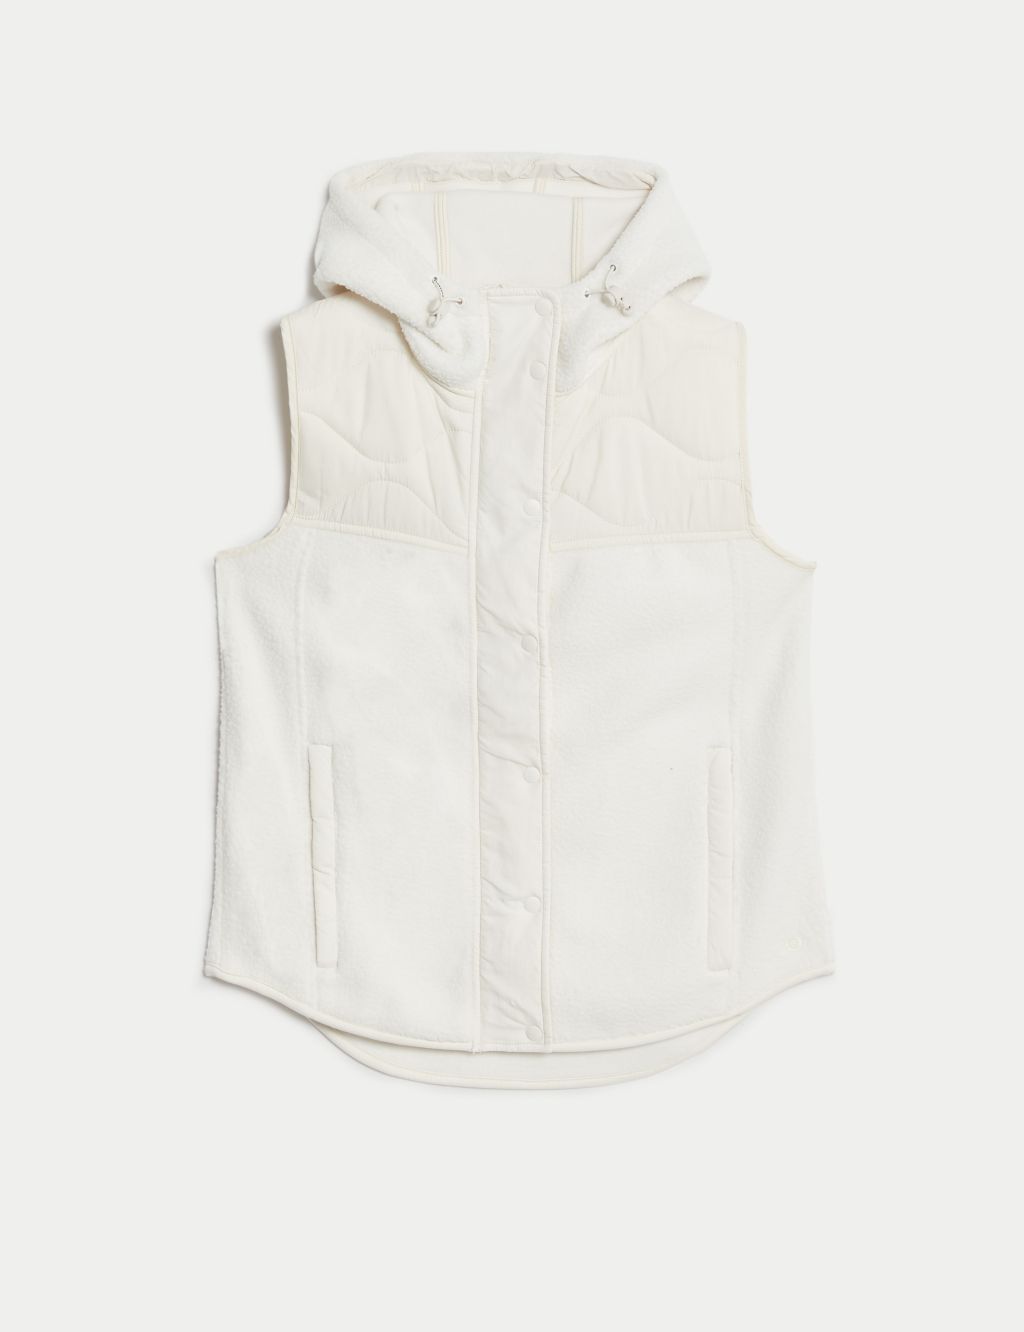 Borg Quilted Zip Up Hooded Gilet image 2